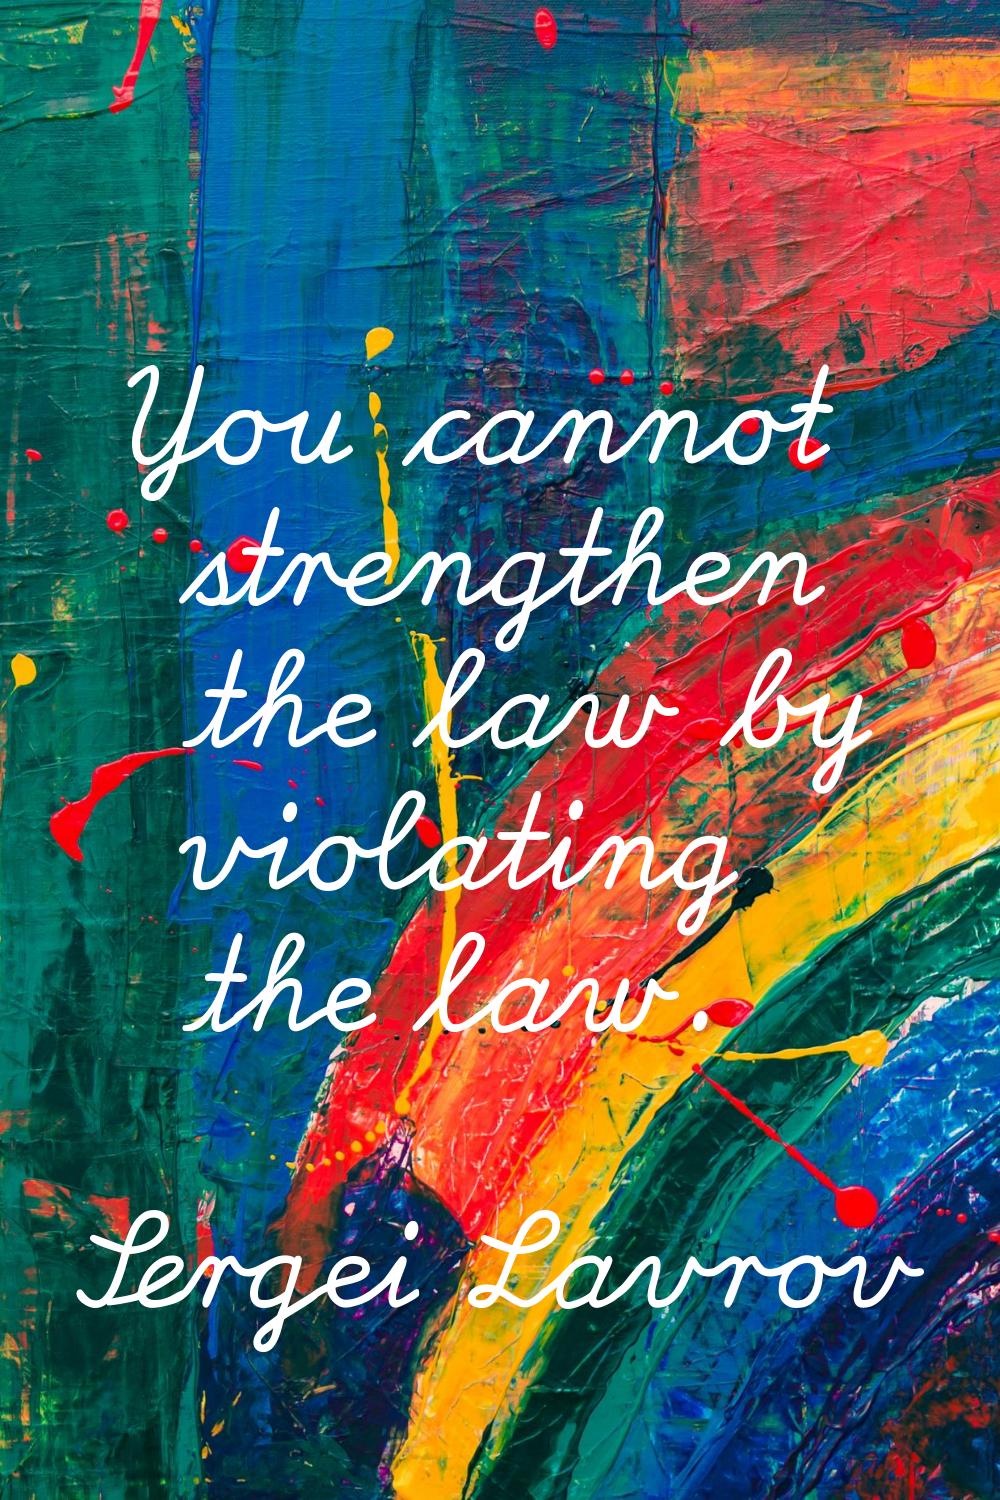 You cannot strengthen the law by violating the law.